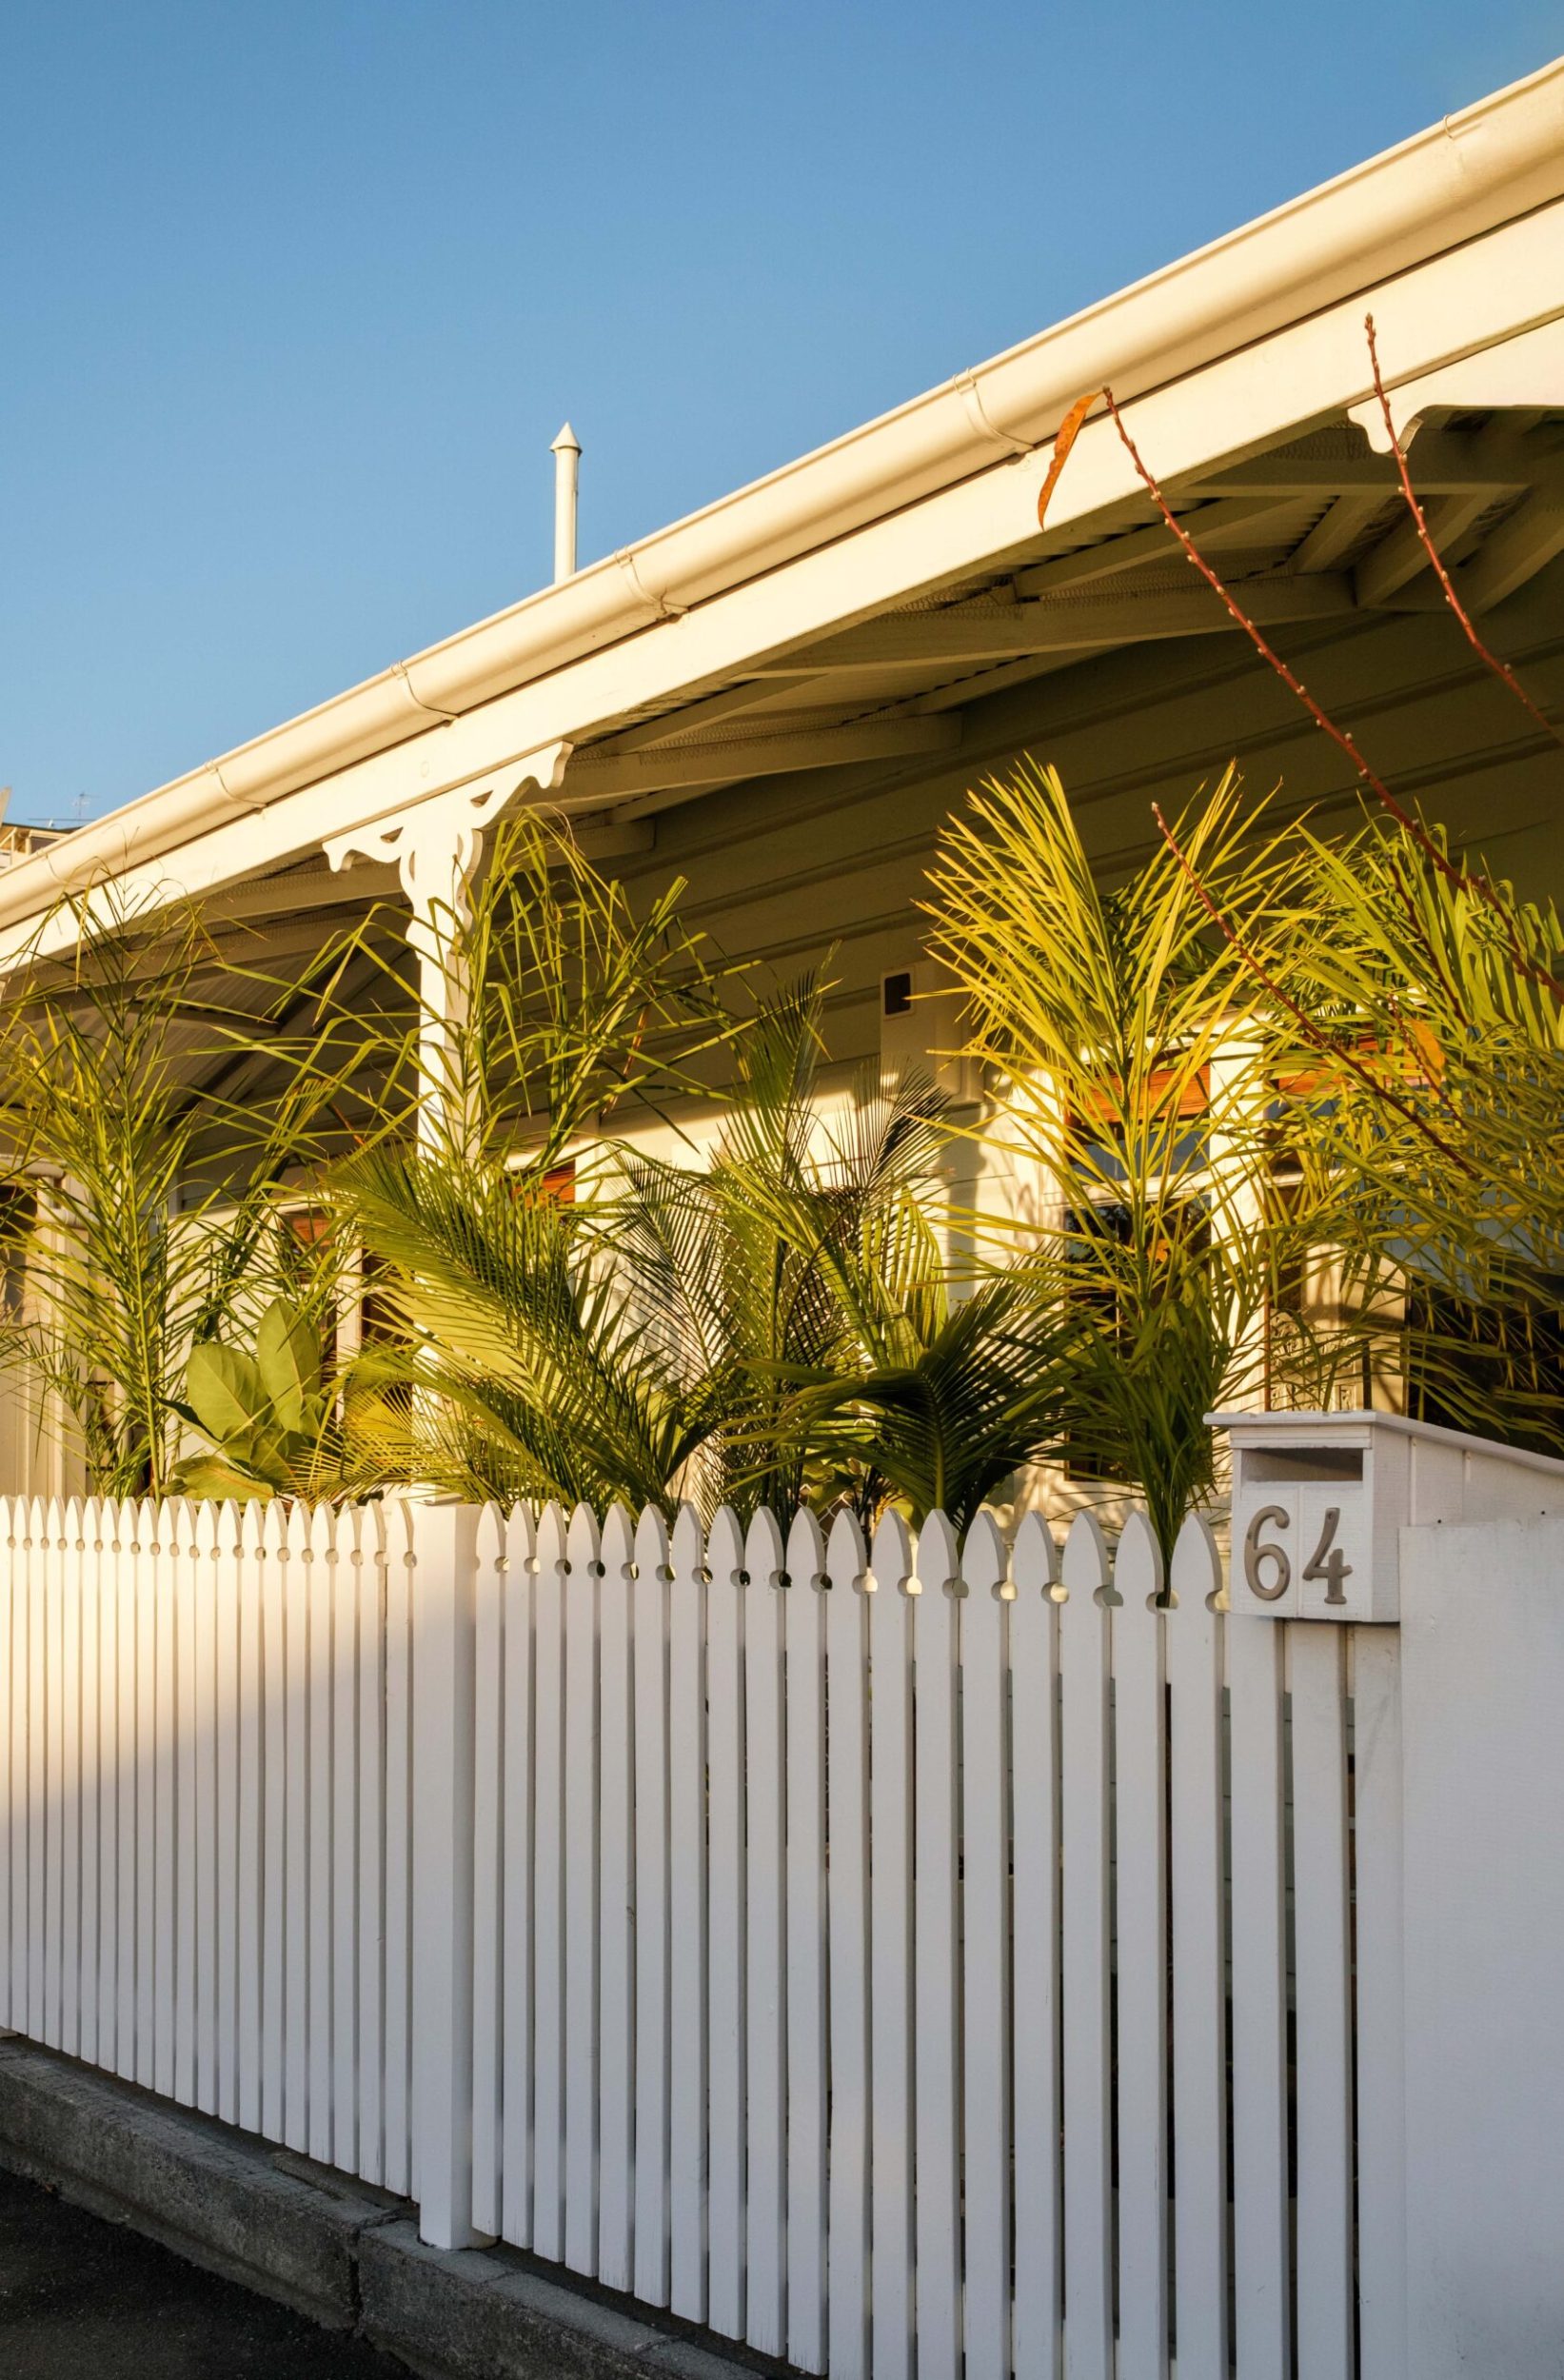 white cottage with white picket fence and palm trees lining the inside of the fence